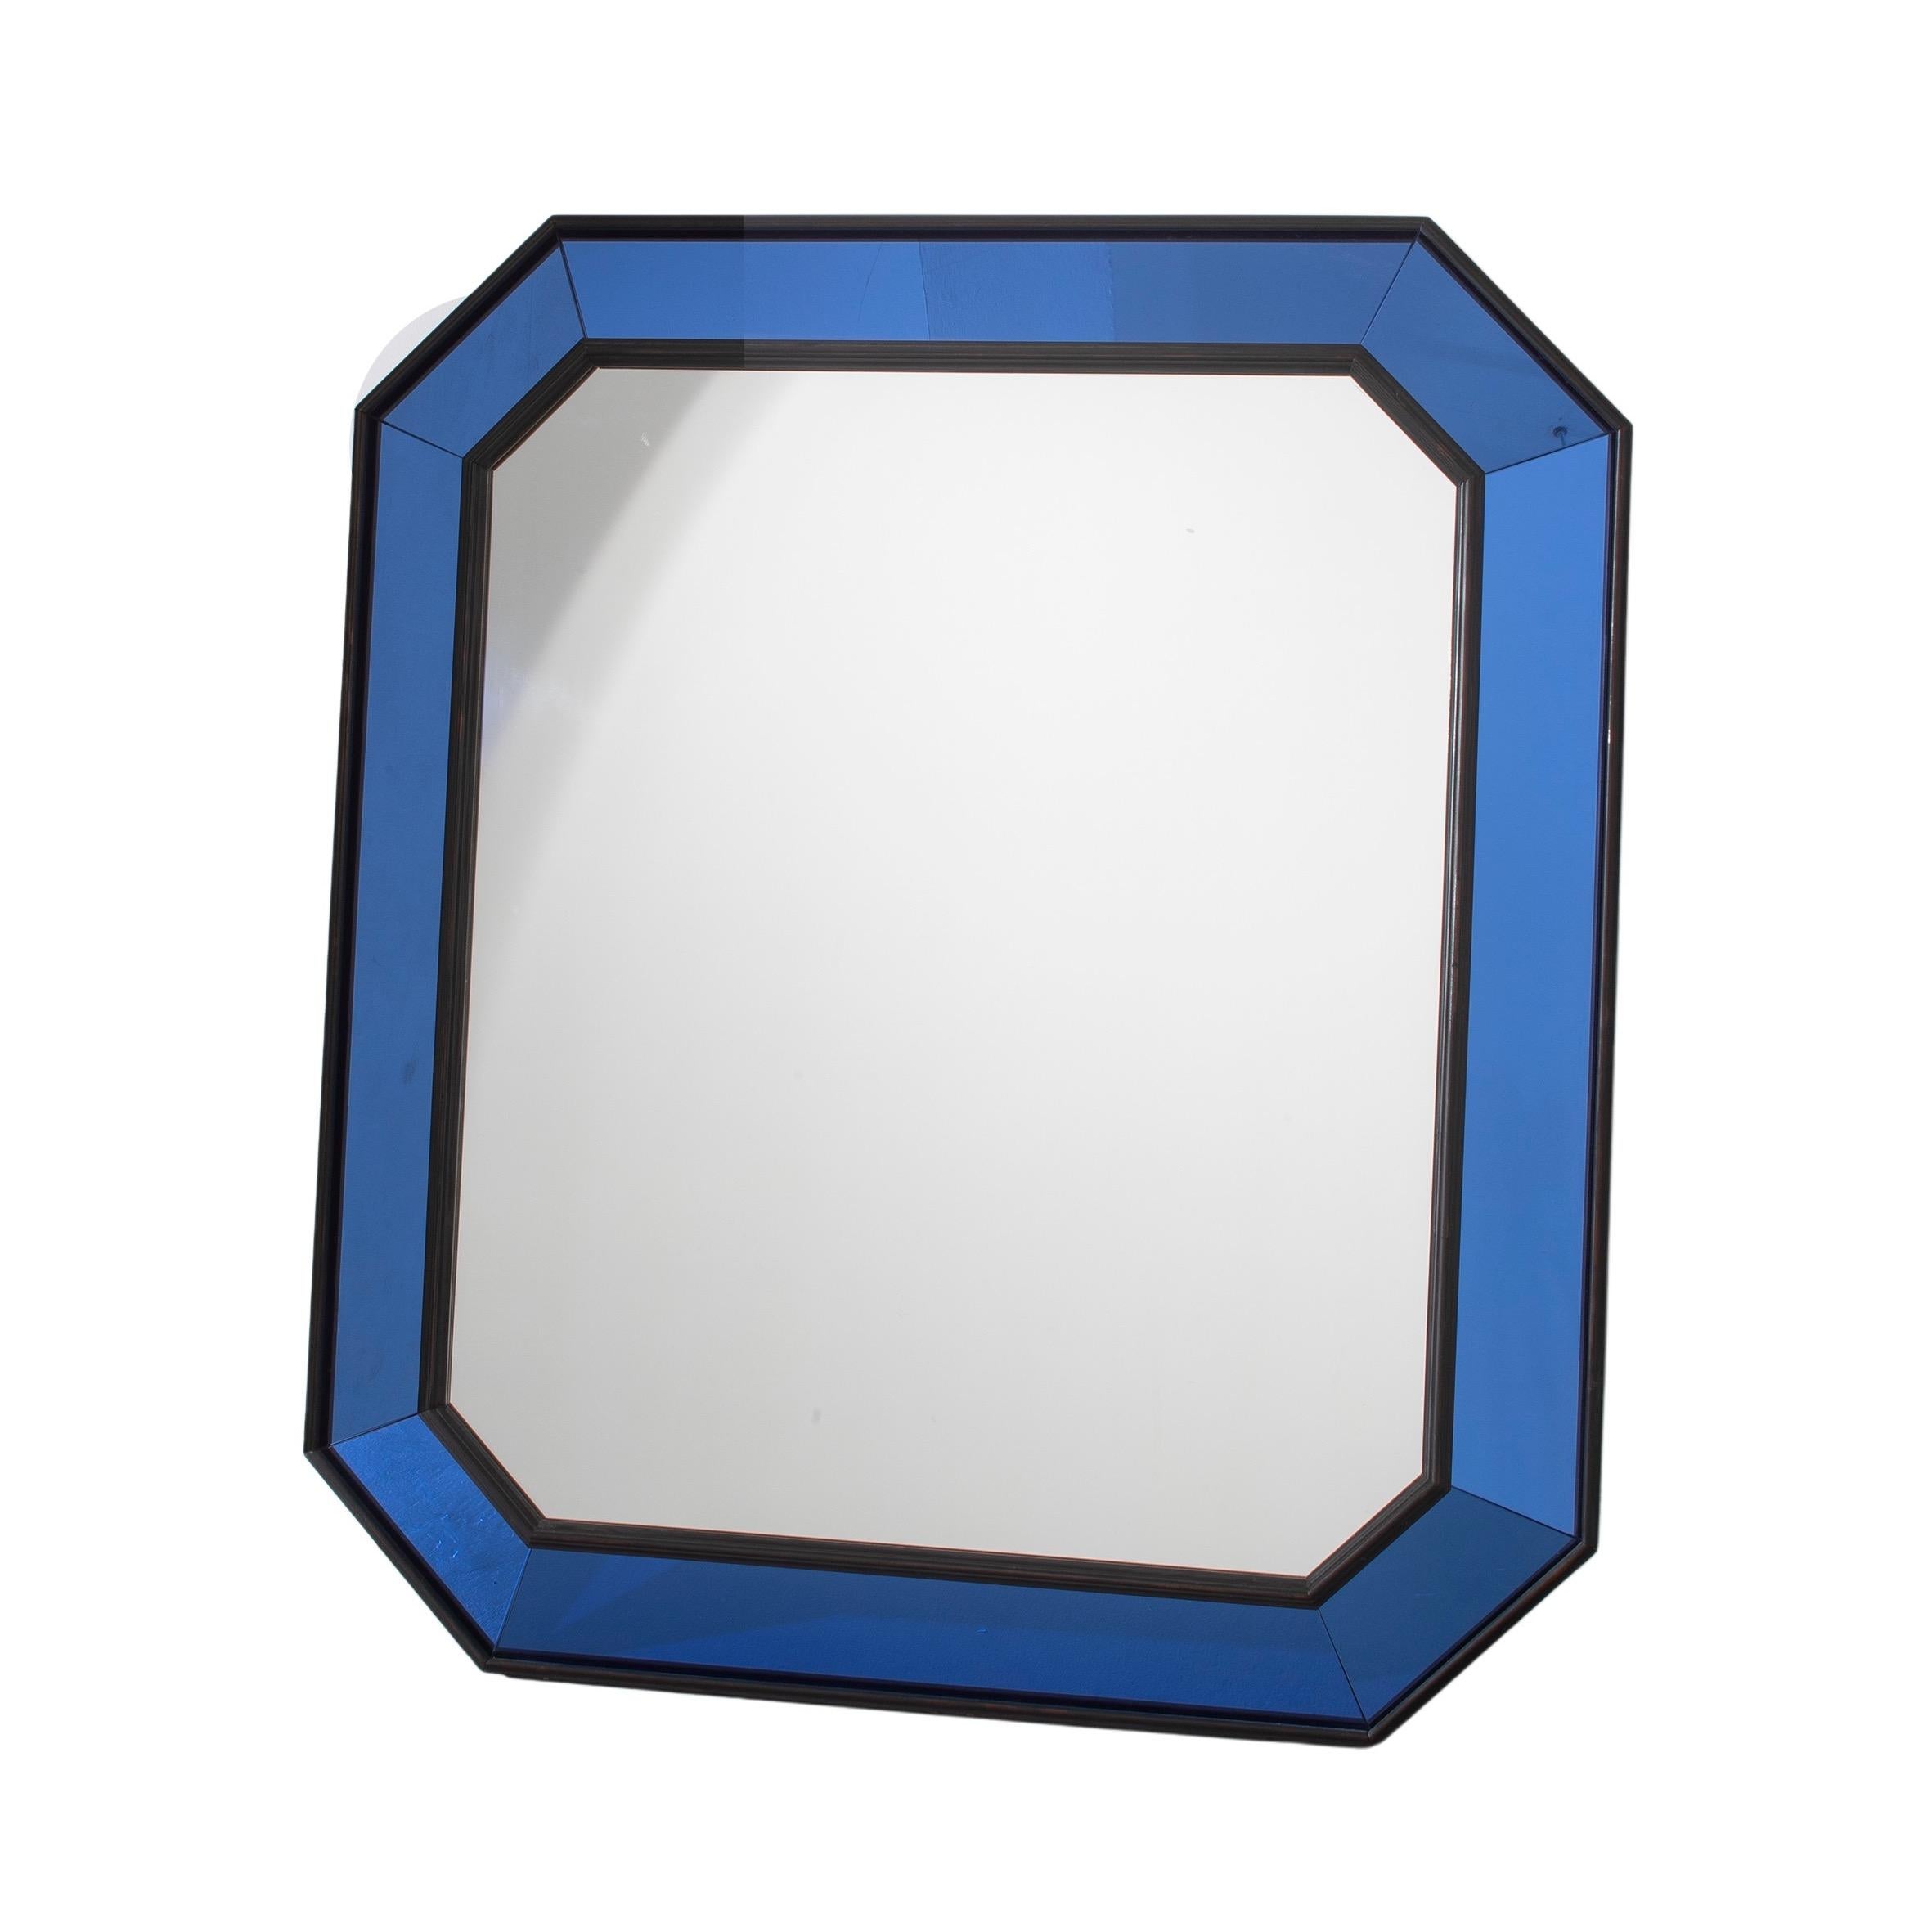 Mid Century Italian blue glass cushion mirror

An impressively scaled mid-century Italian cushion mirror with a blue glass and ebonised wooden frame.

Dimensions: H 127cm x W 111cm x D 8cm
In excellent condition.

A further slightly smaller